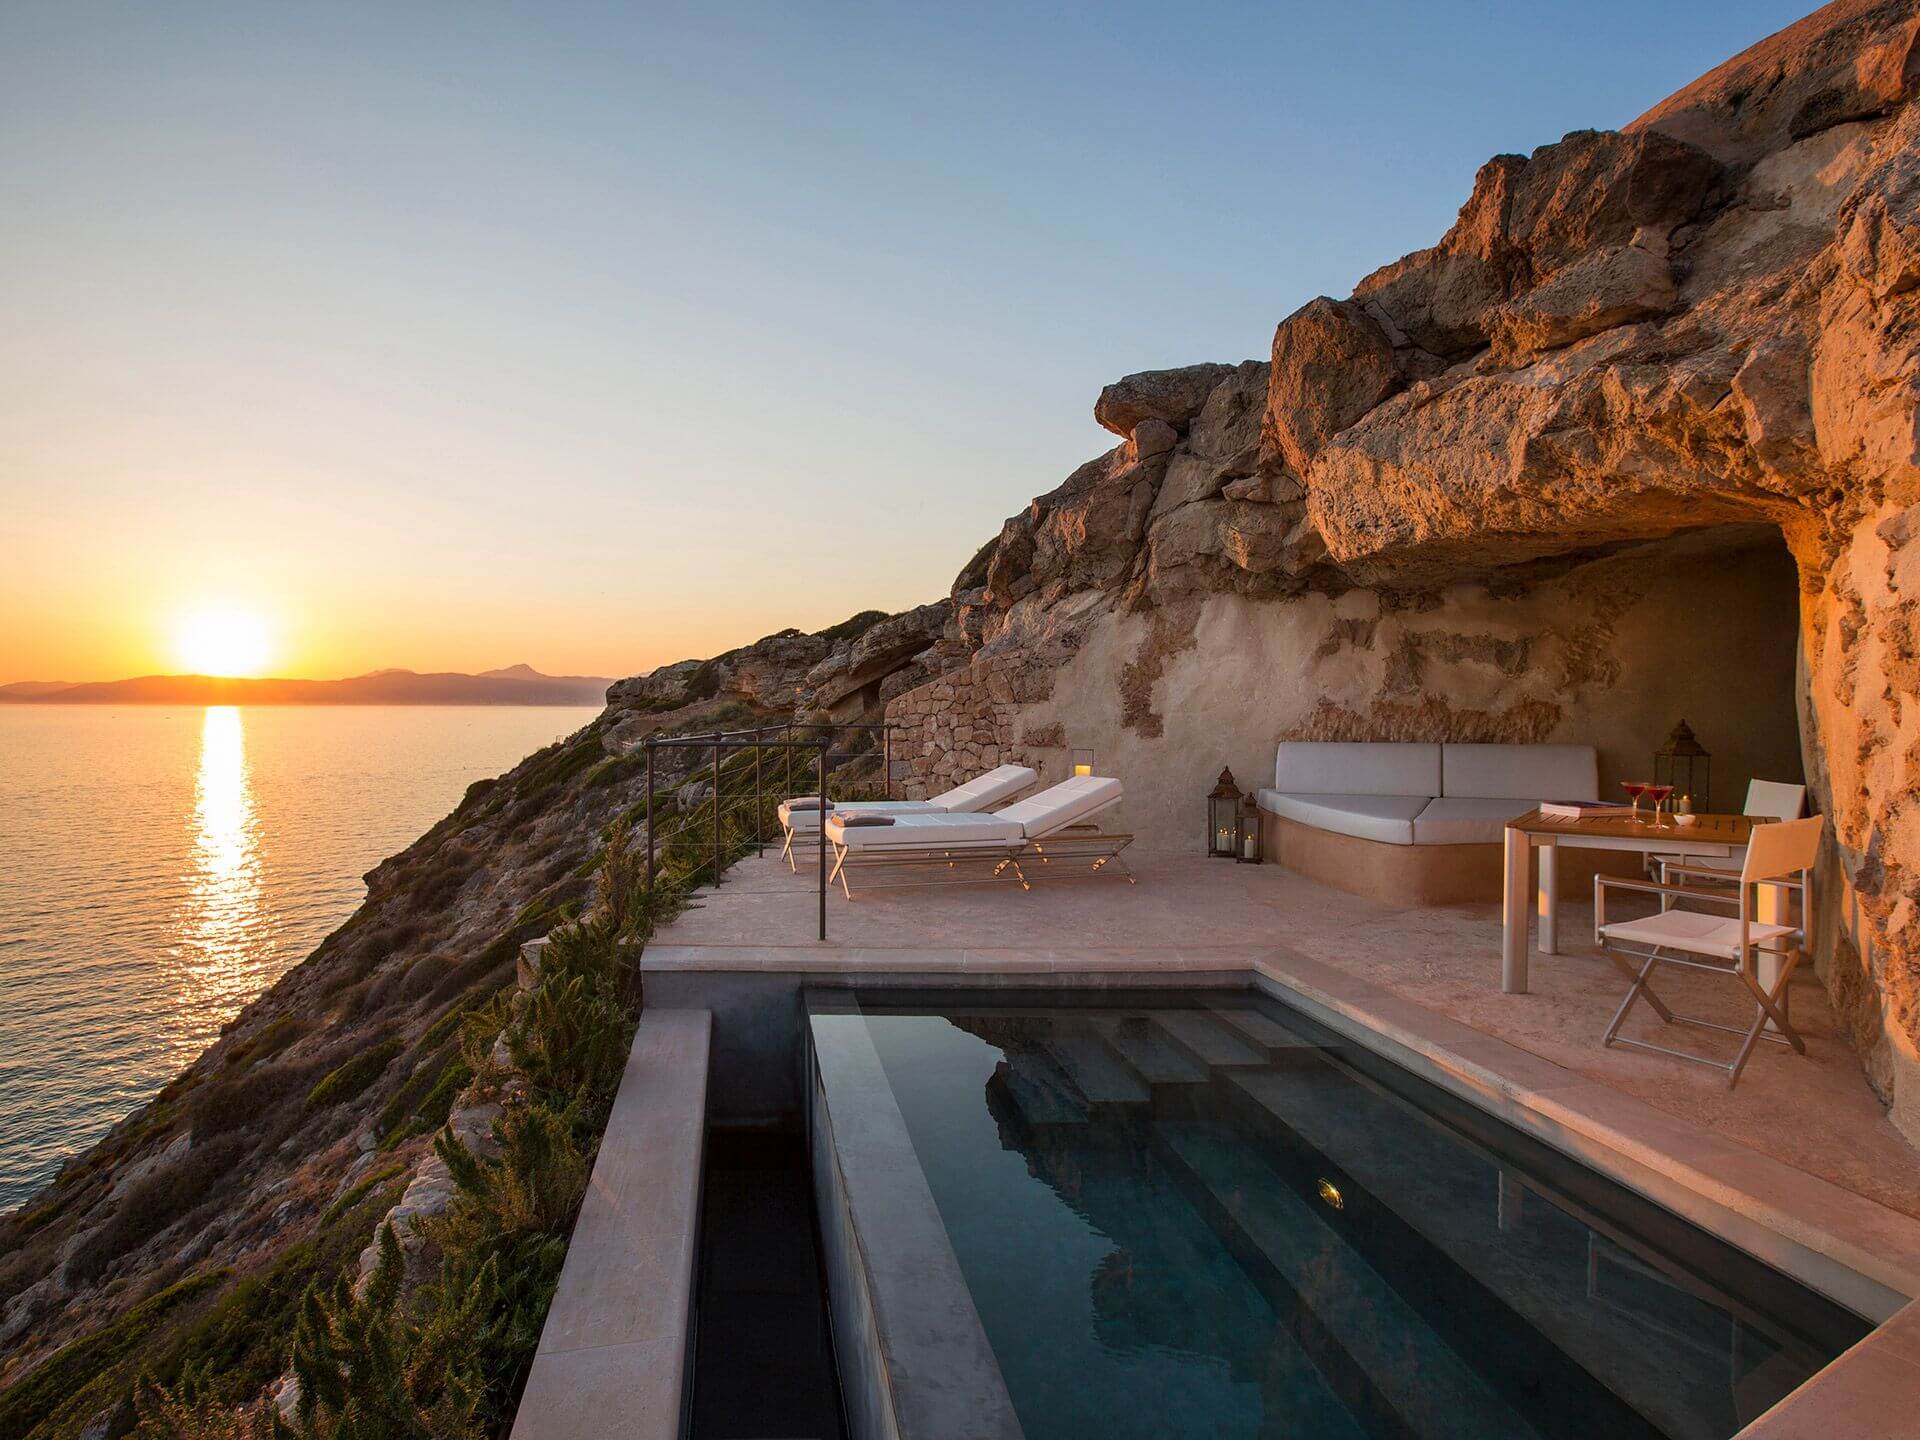 Cap Rocat - one of the most iconic luxury hotels in Mallorca. Photo by Cap Rocat